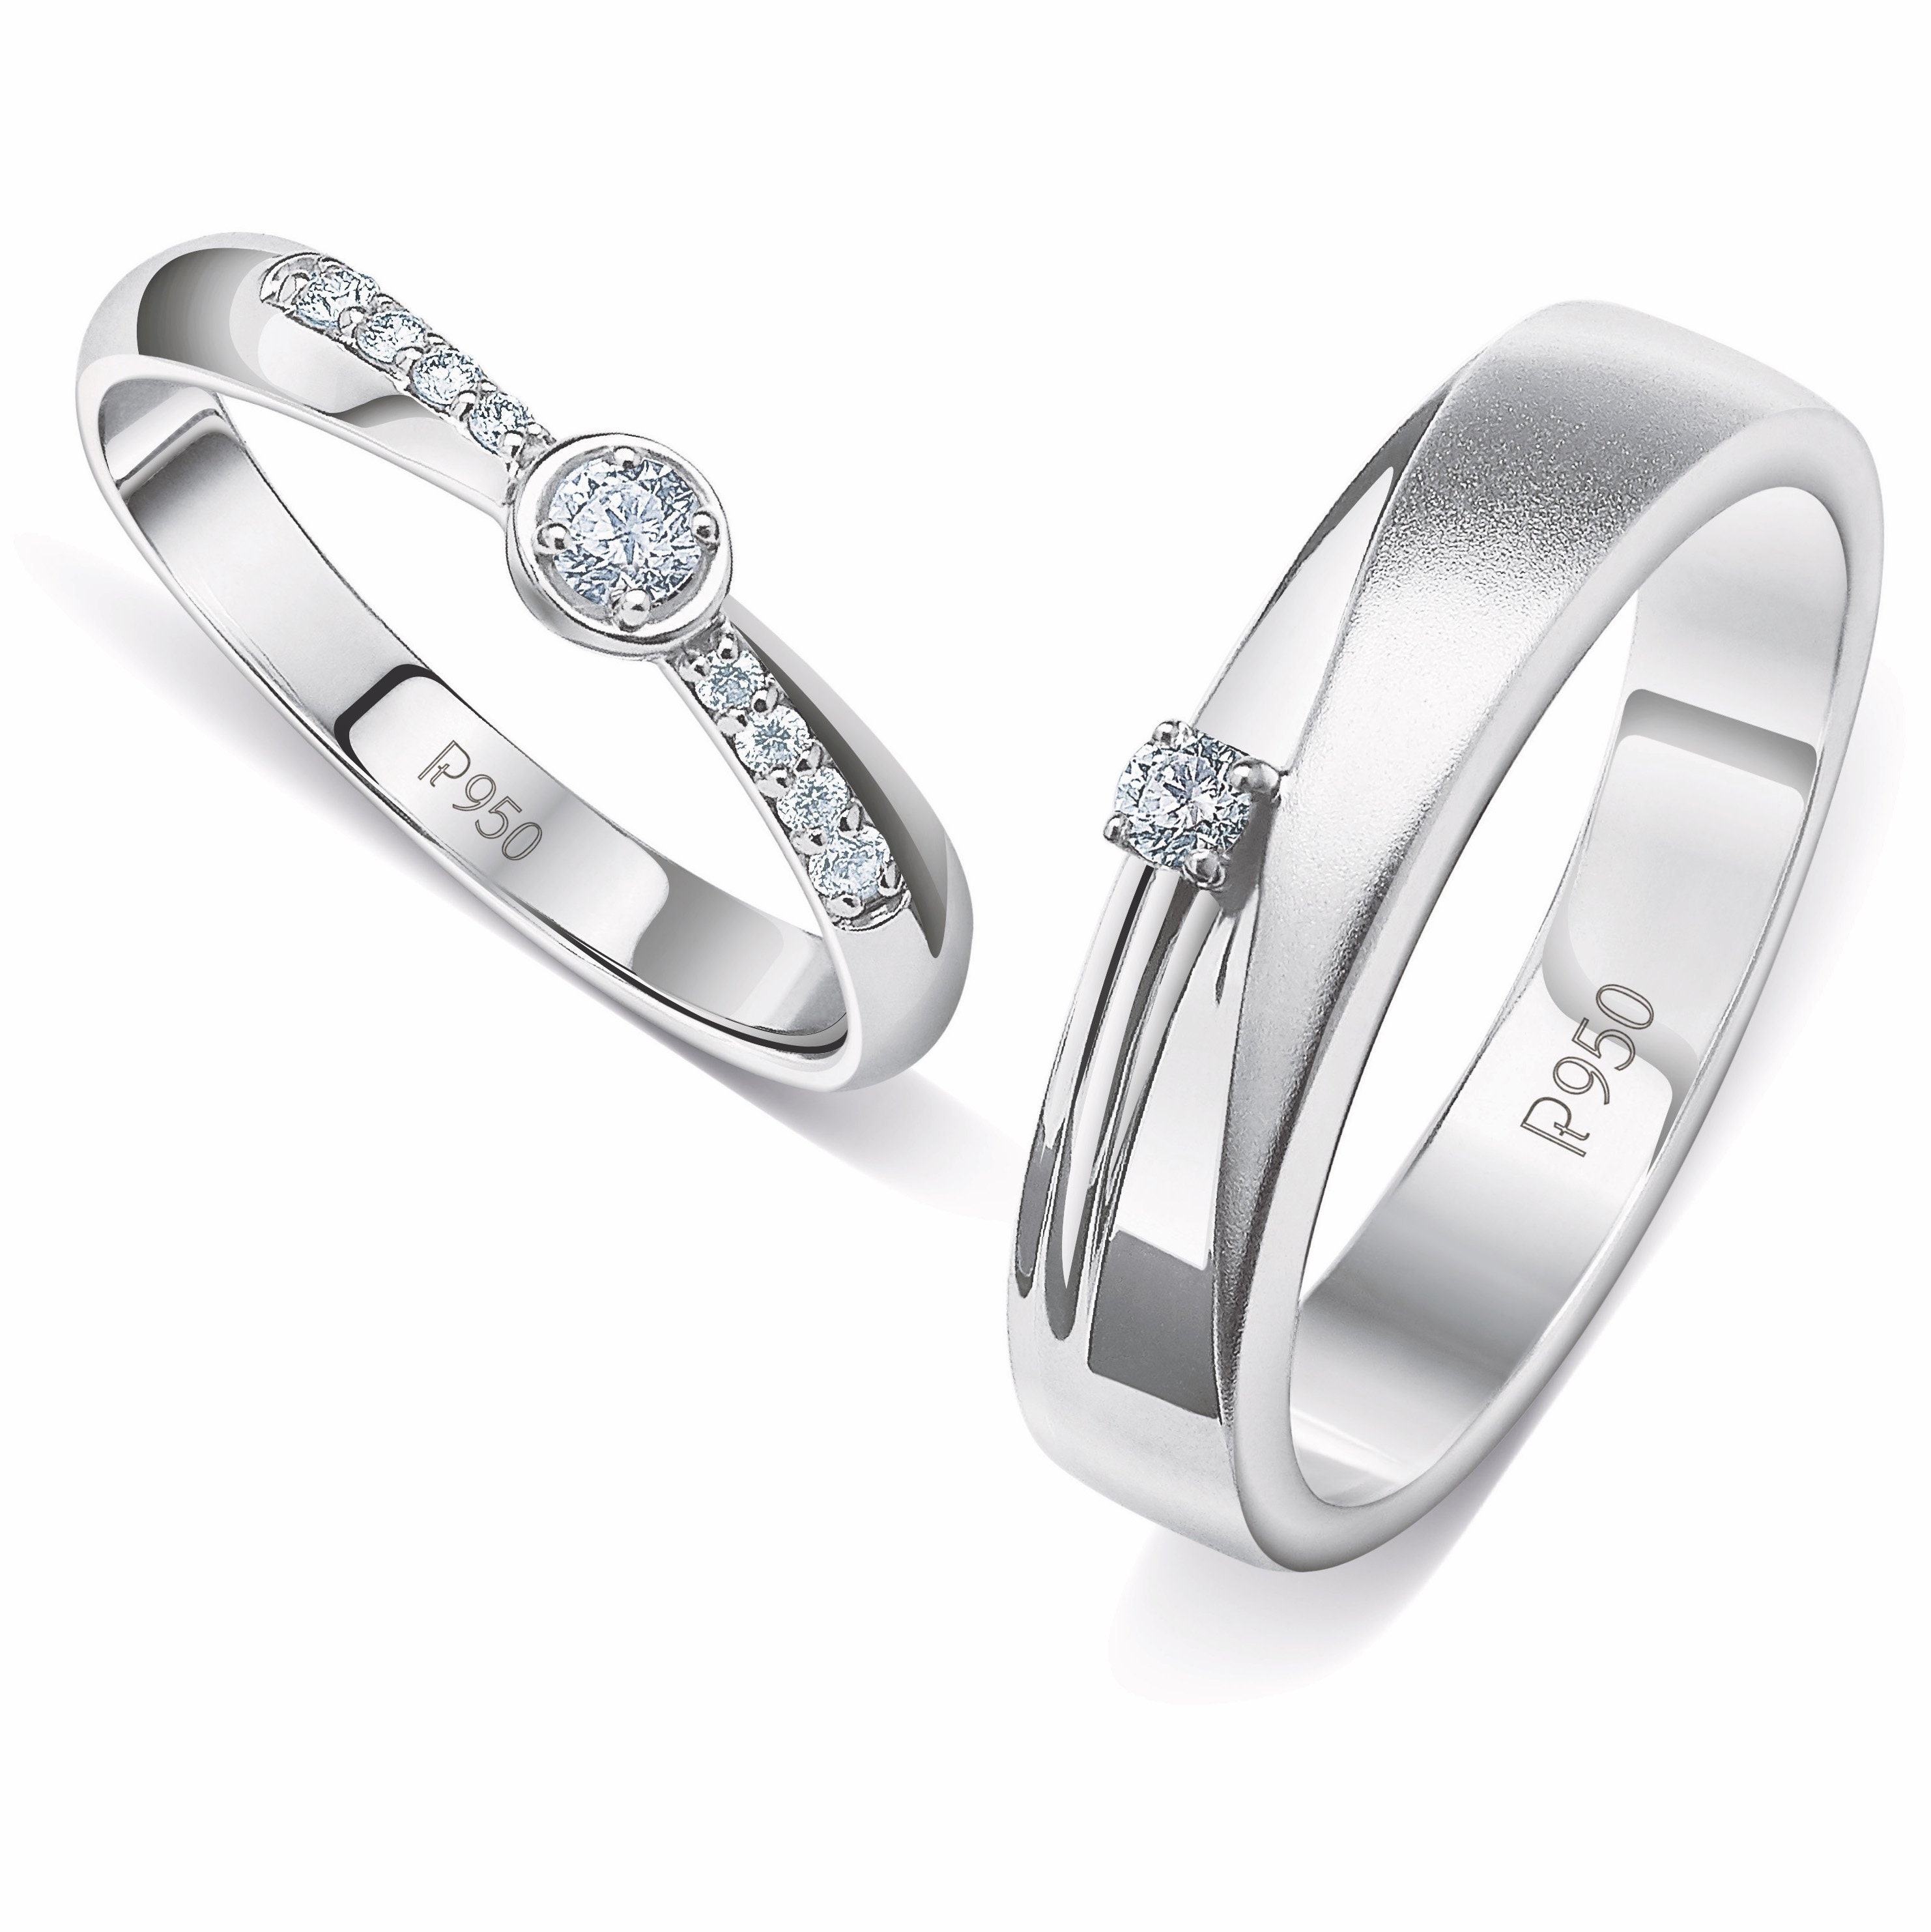 15 New Designs for Platinum Rings for Couples - Trending Models | Couple  ring design, Couple wedding rings, Engagement rings couple